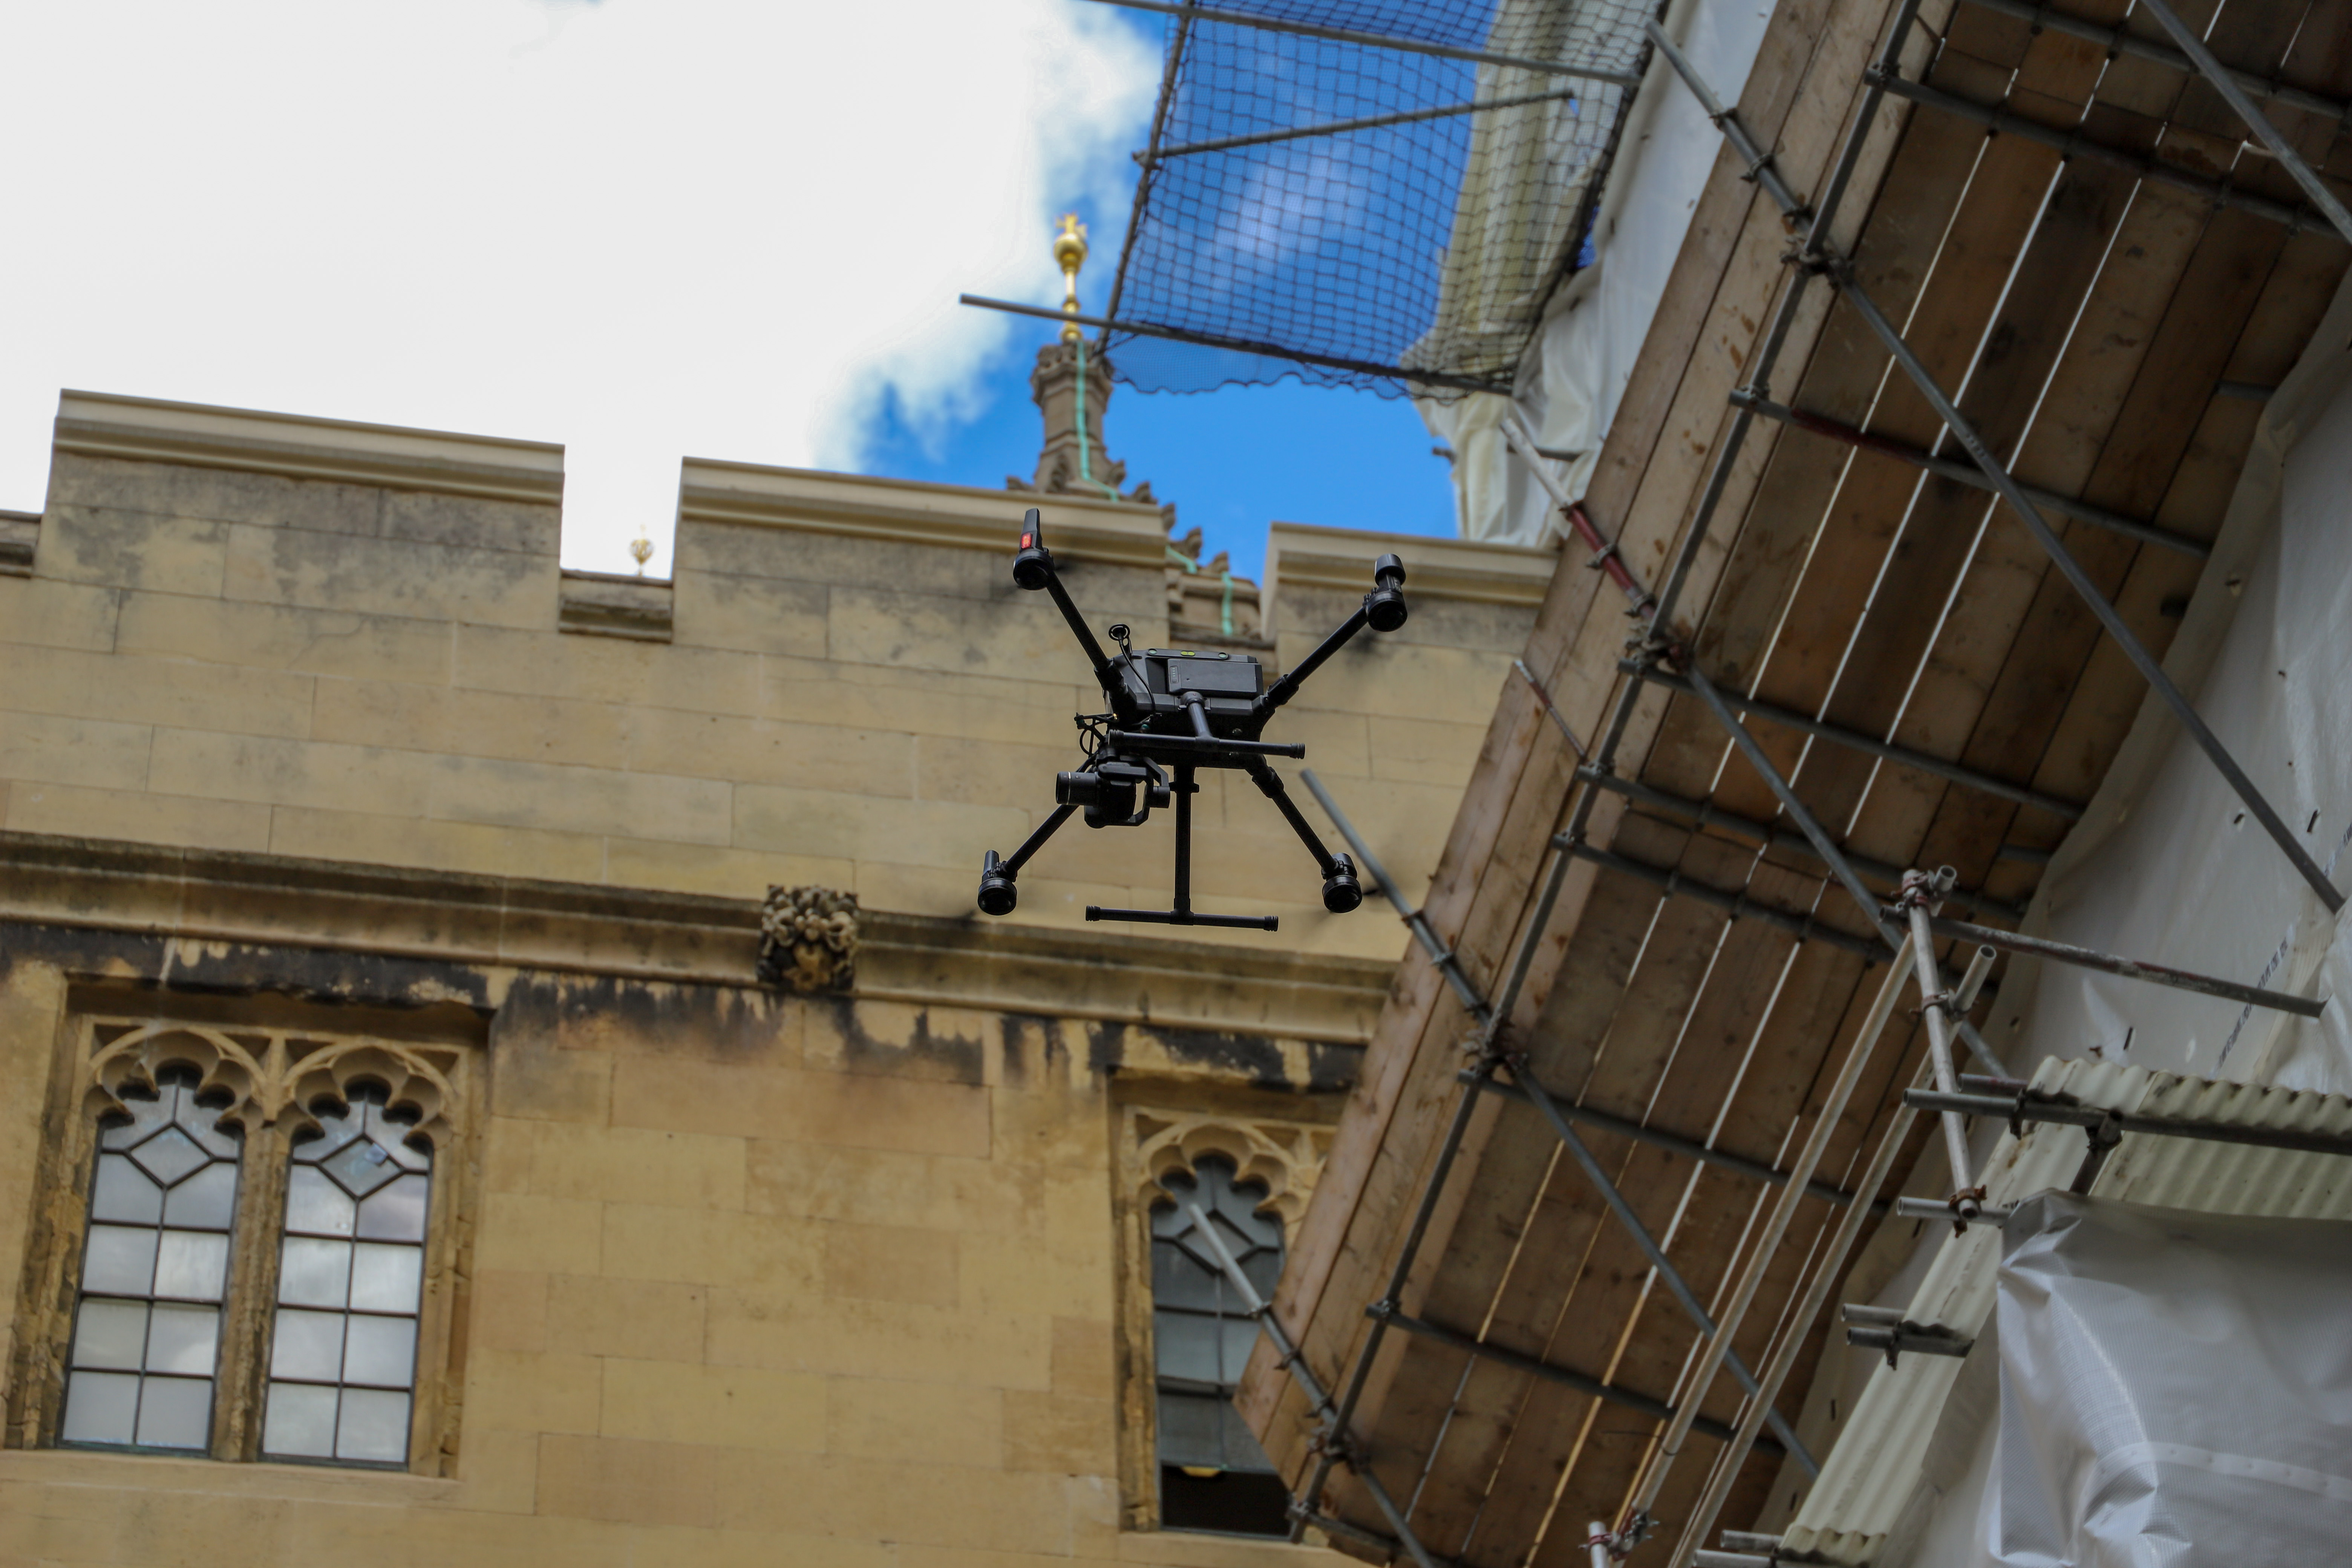 A drone surveying the Palace of Westminster